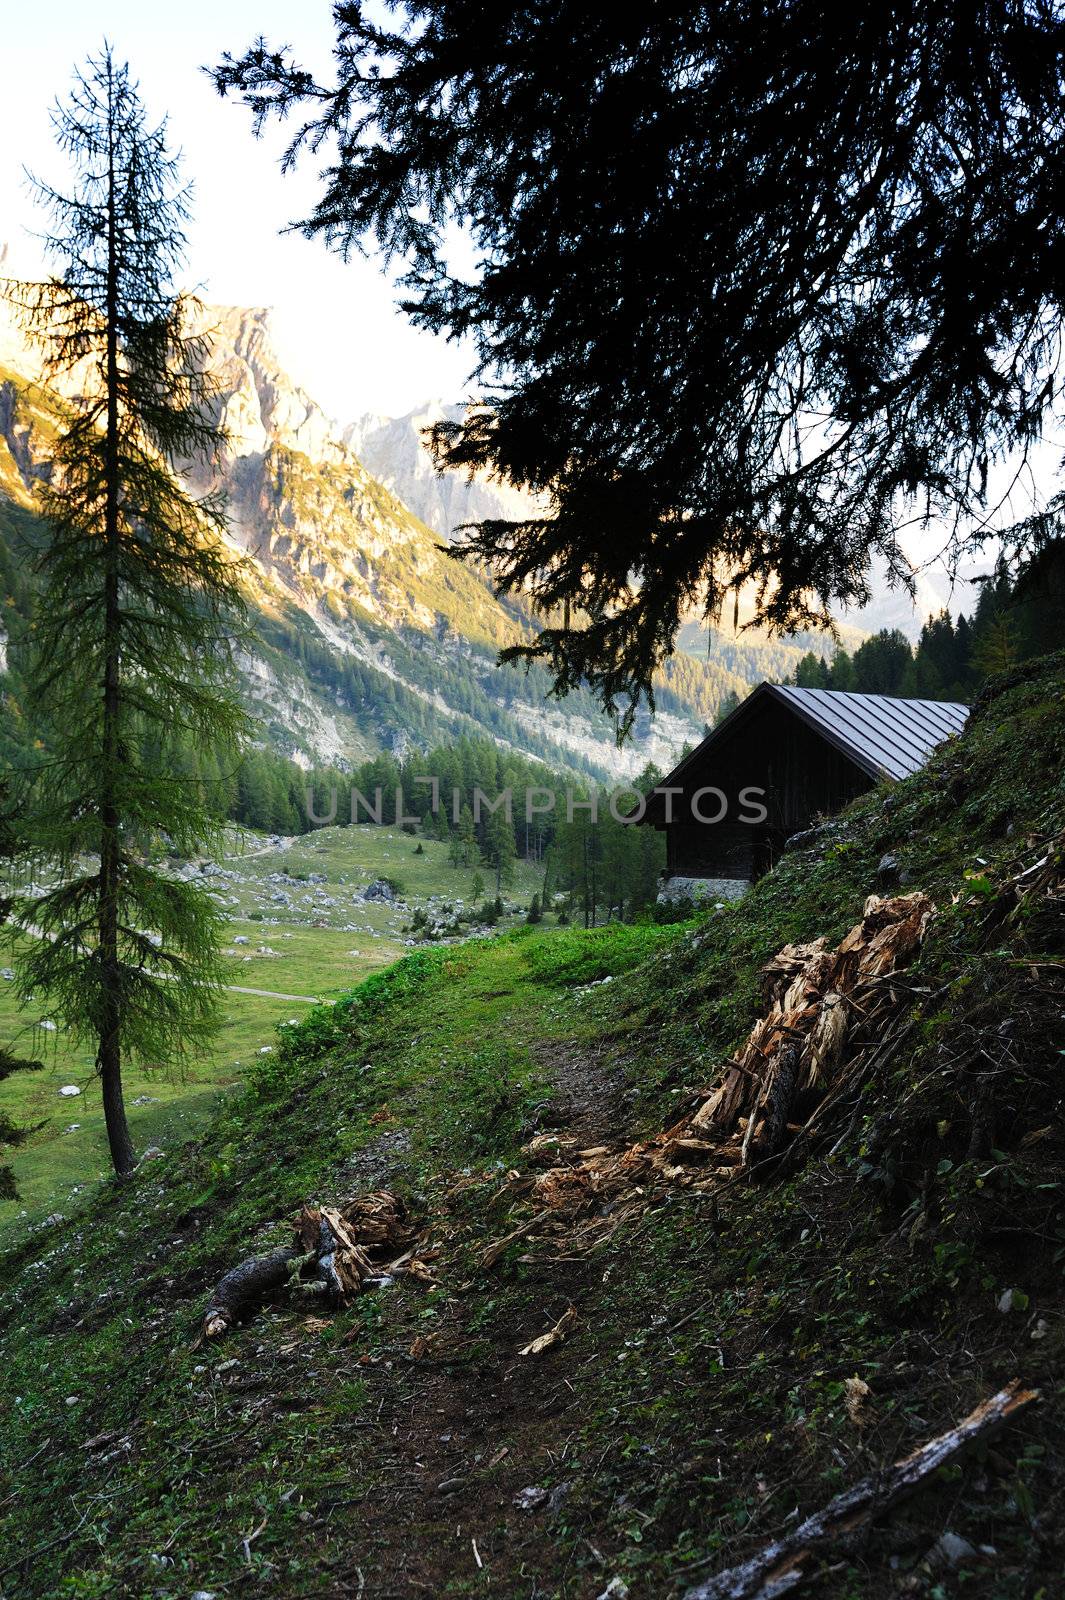 An image of a little house in the mountains